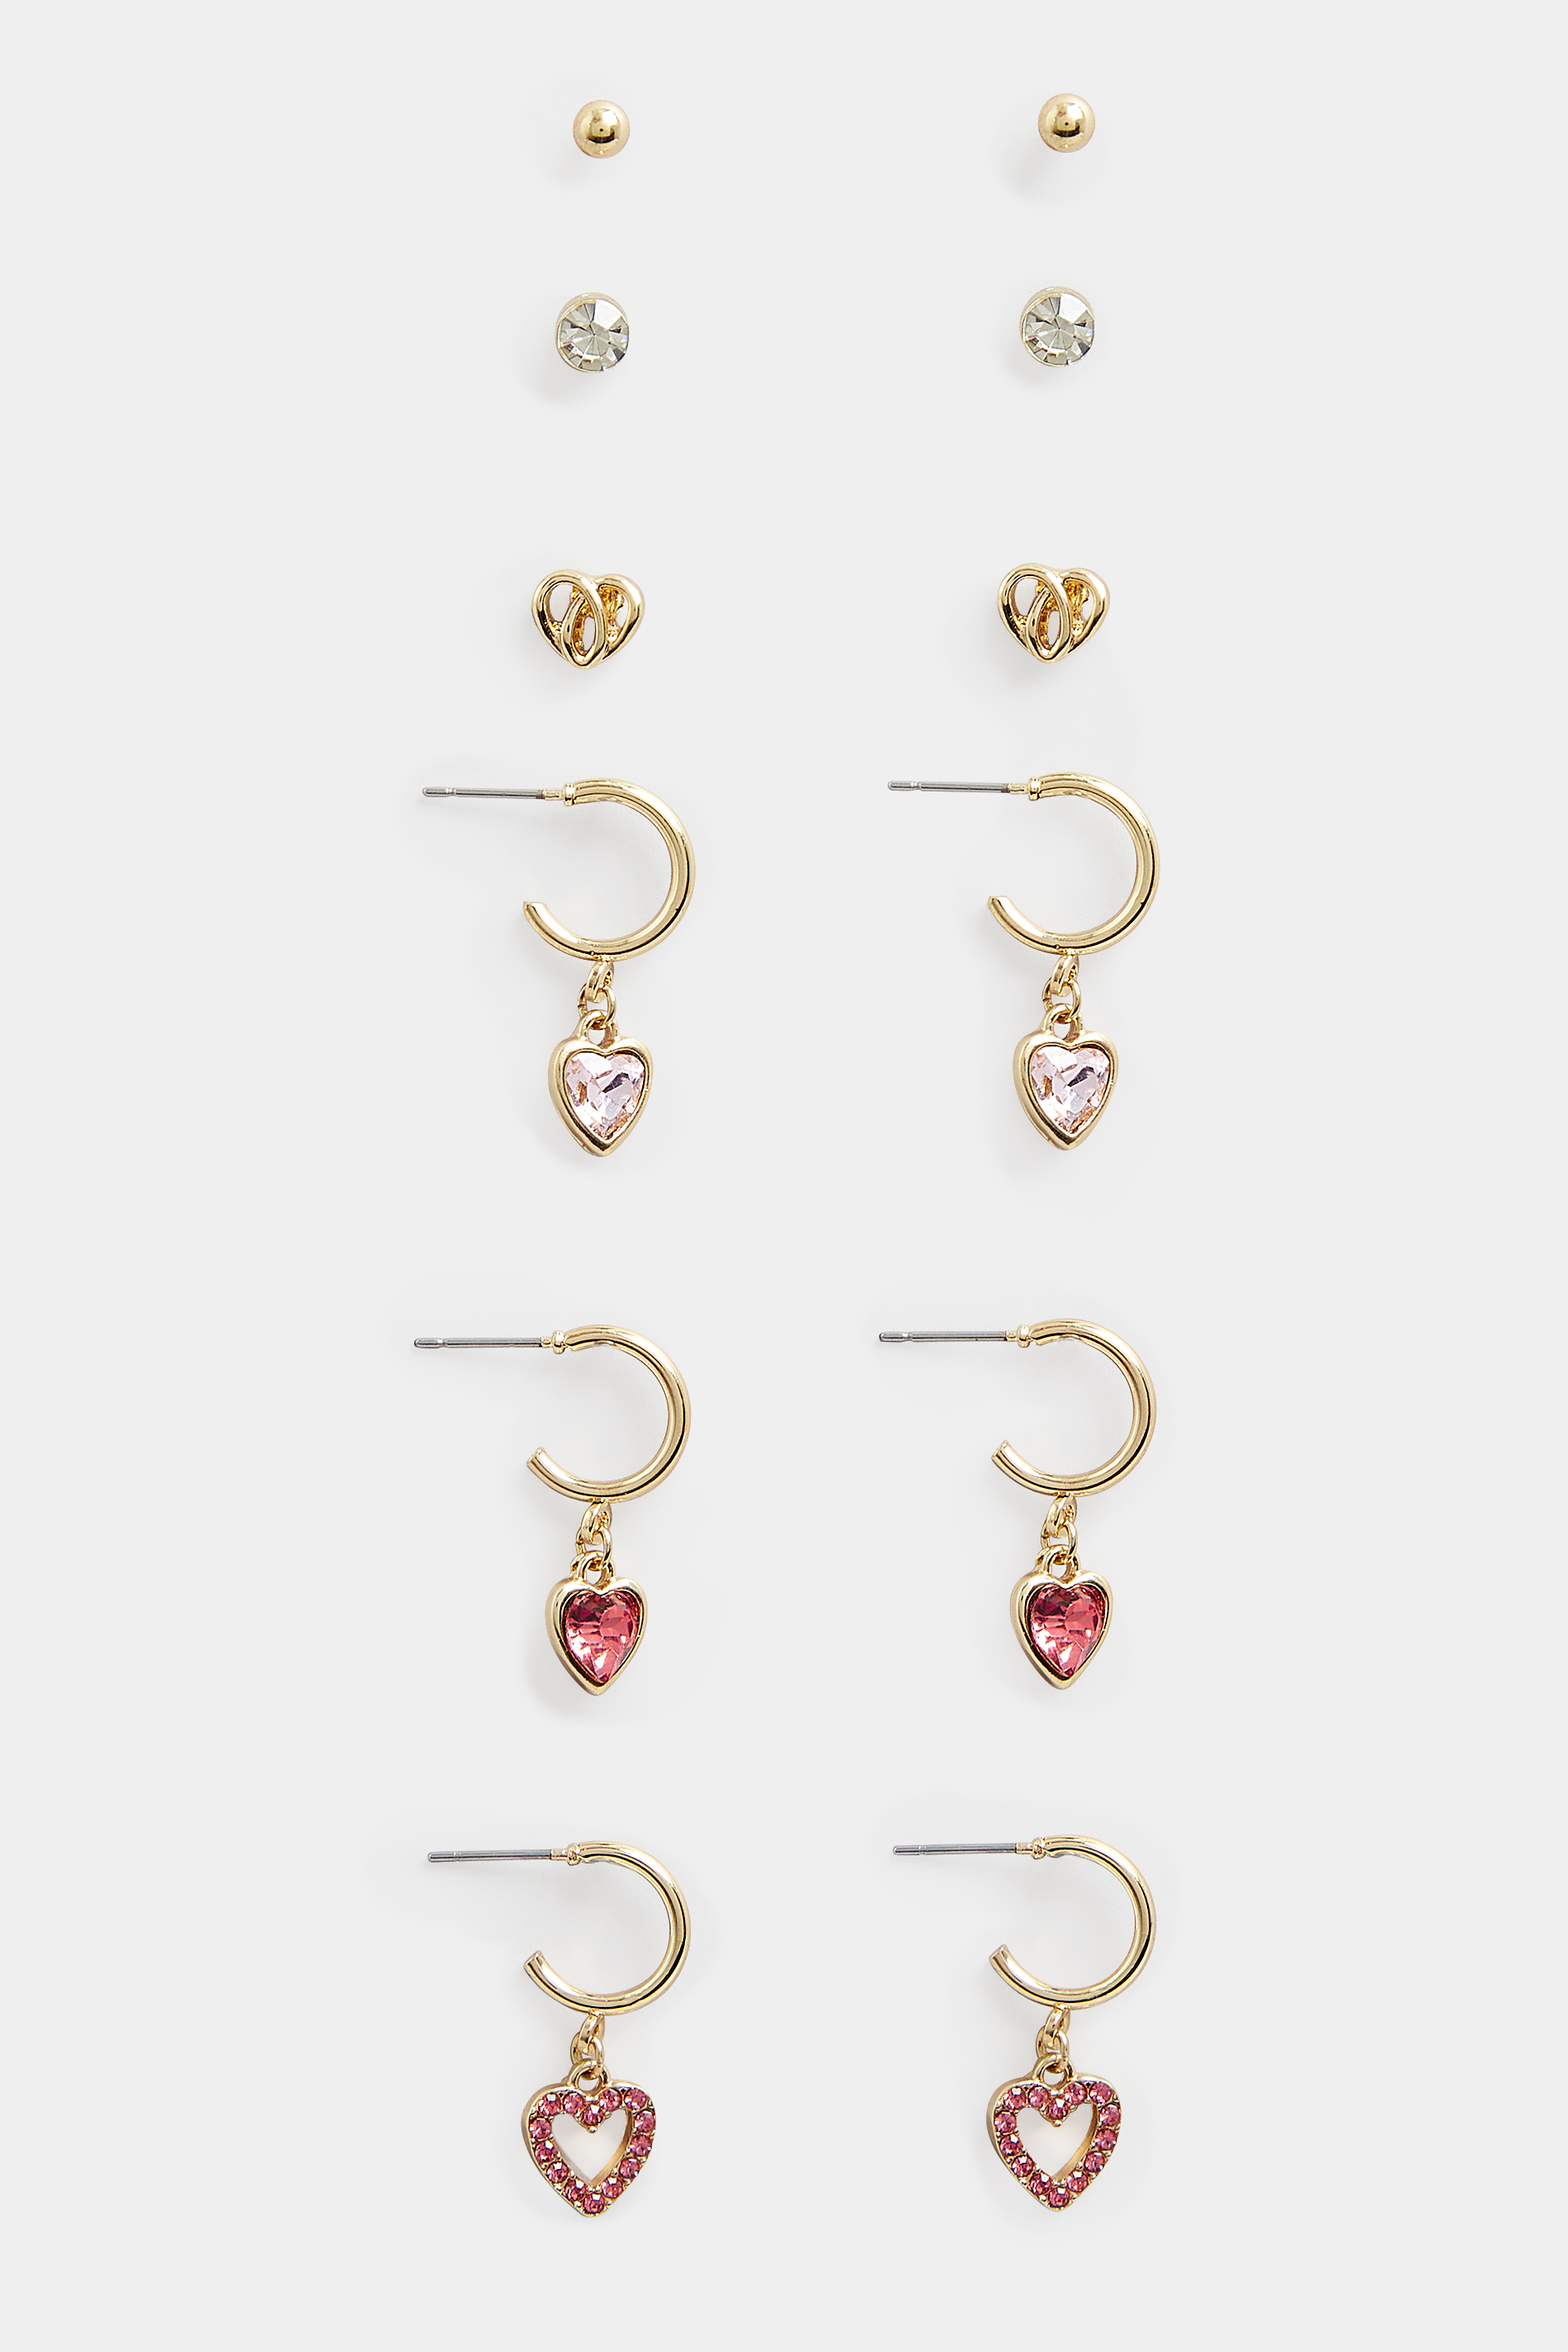 6 PACK Gold Heart Hoop Earrings Set | Yours Clothing  2